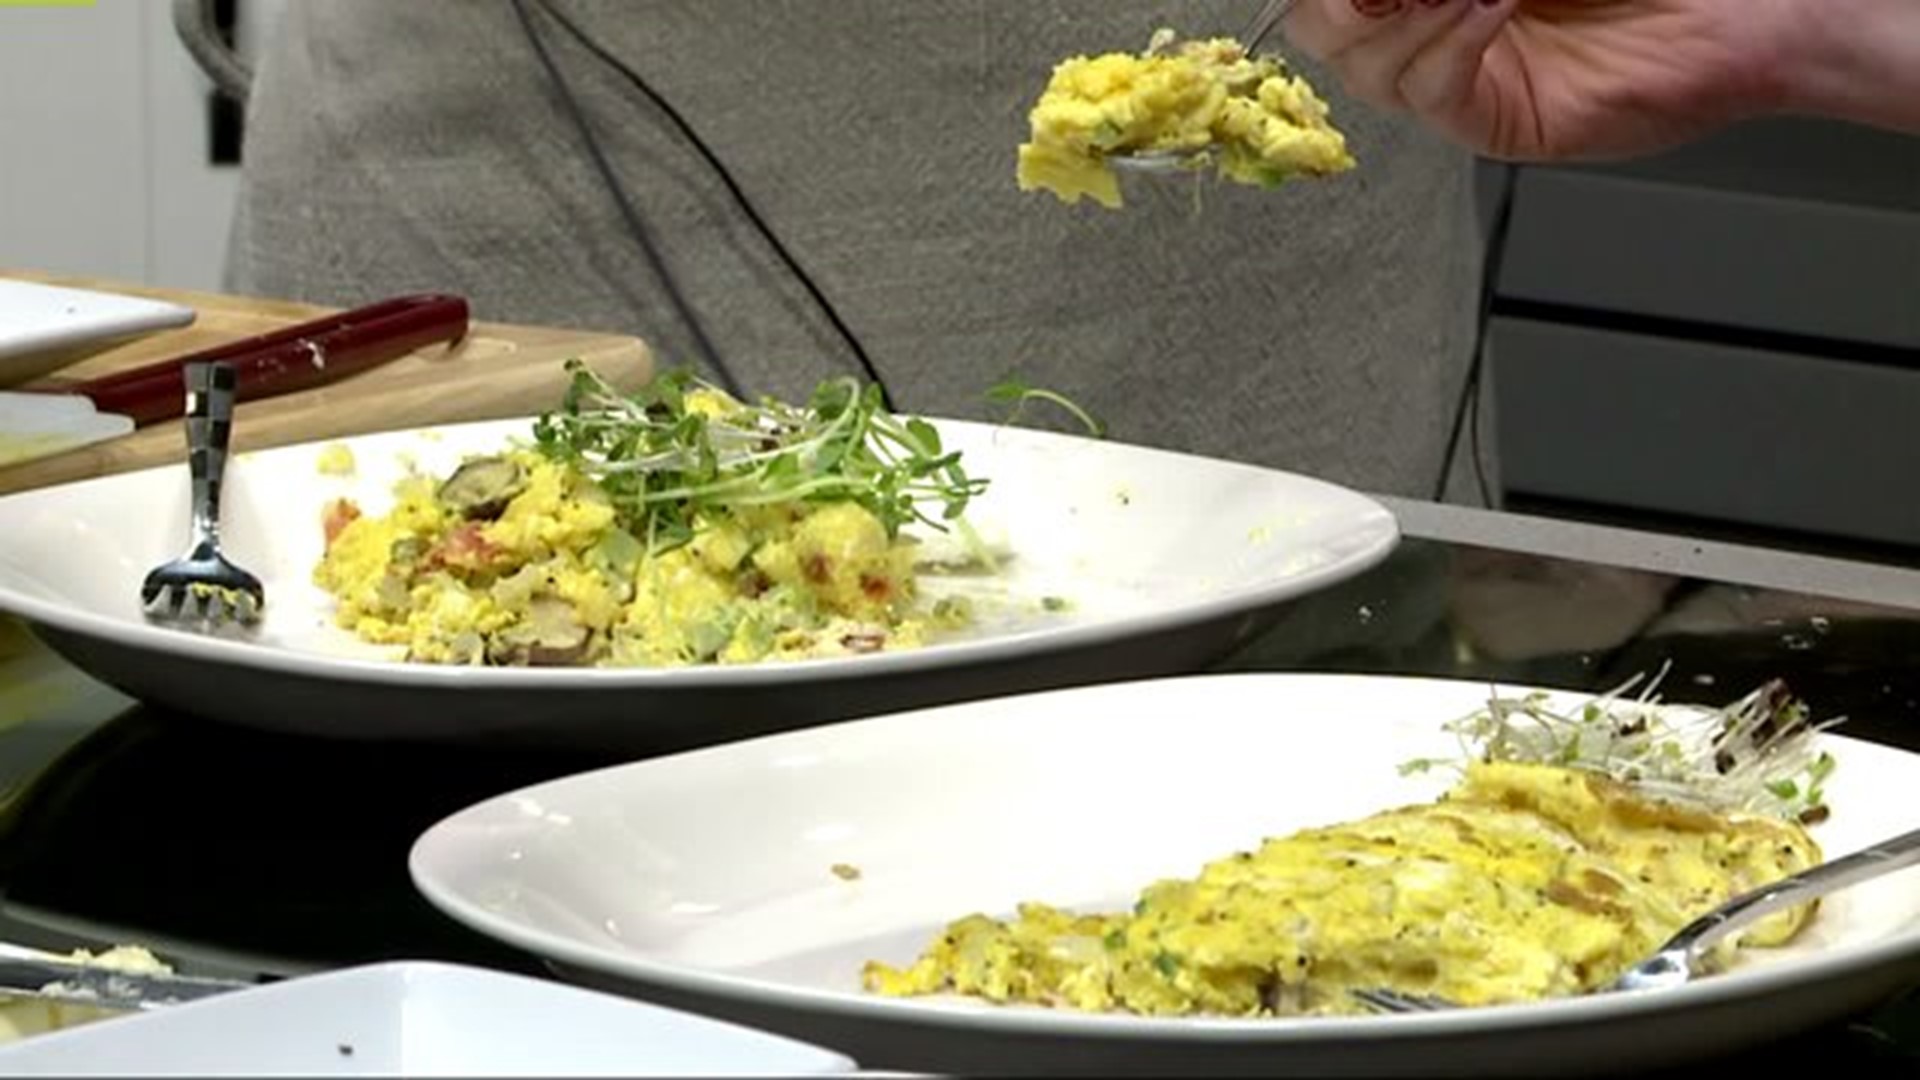 Results of the Fox 43 Iron Chef Competition